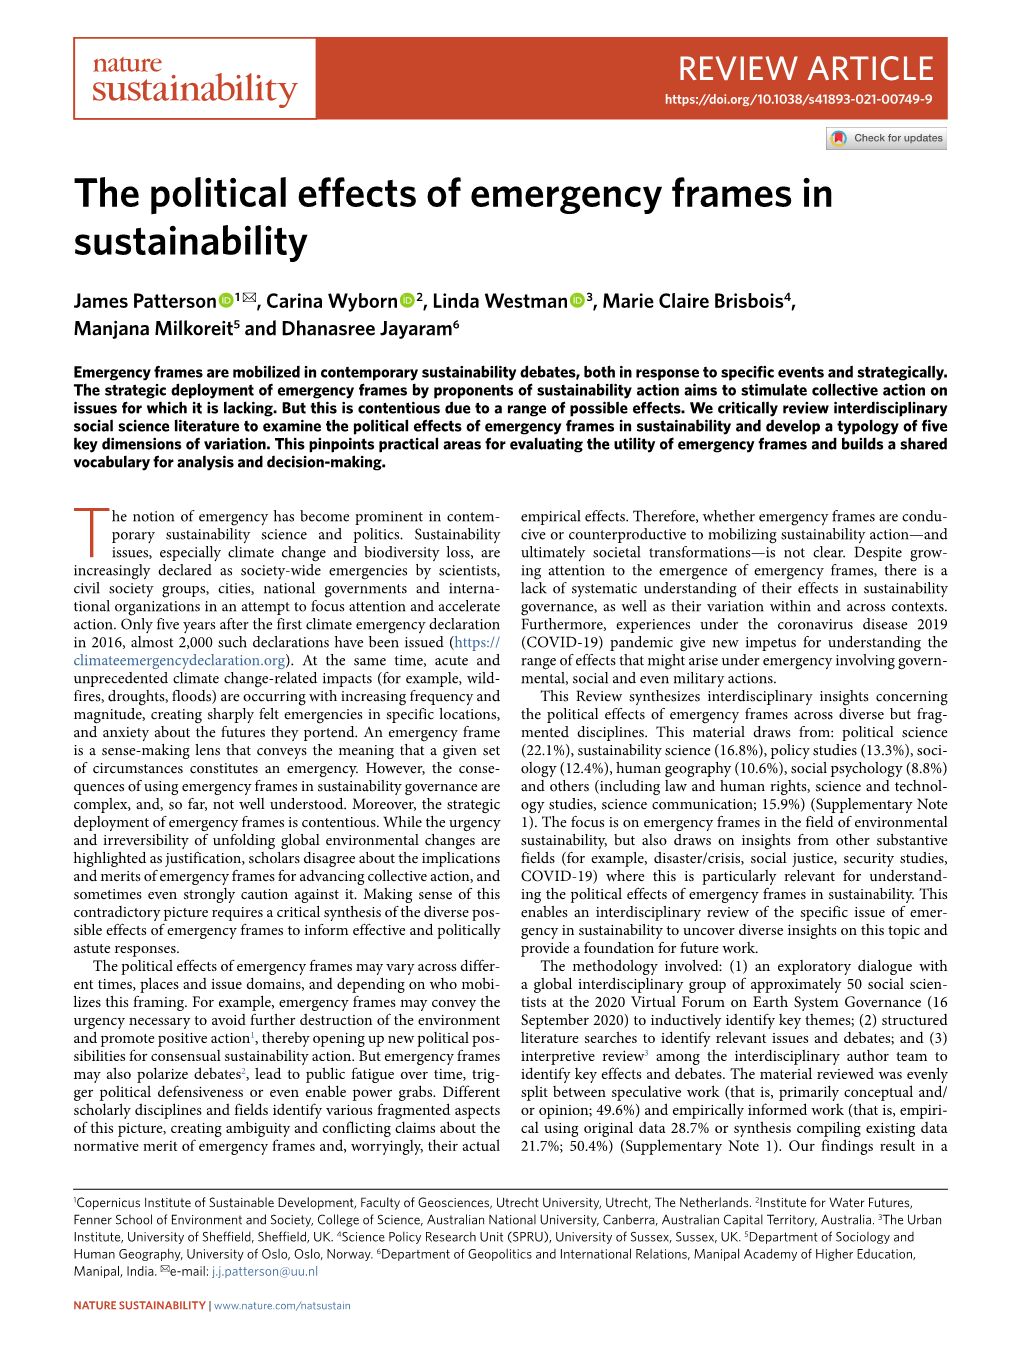 The Political Effects of Emergency Frames in Sustainability